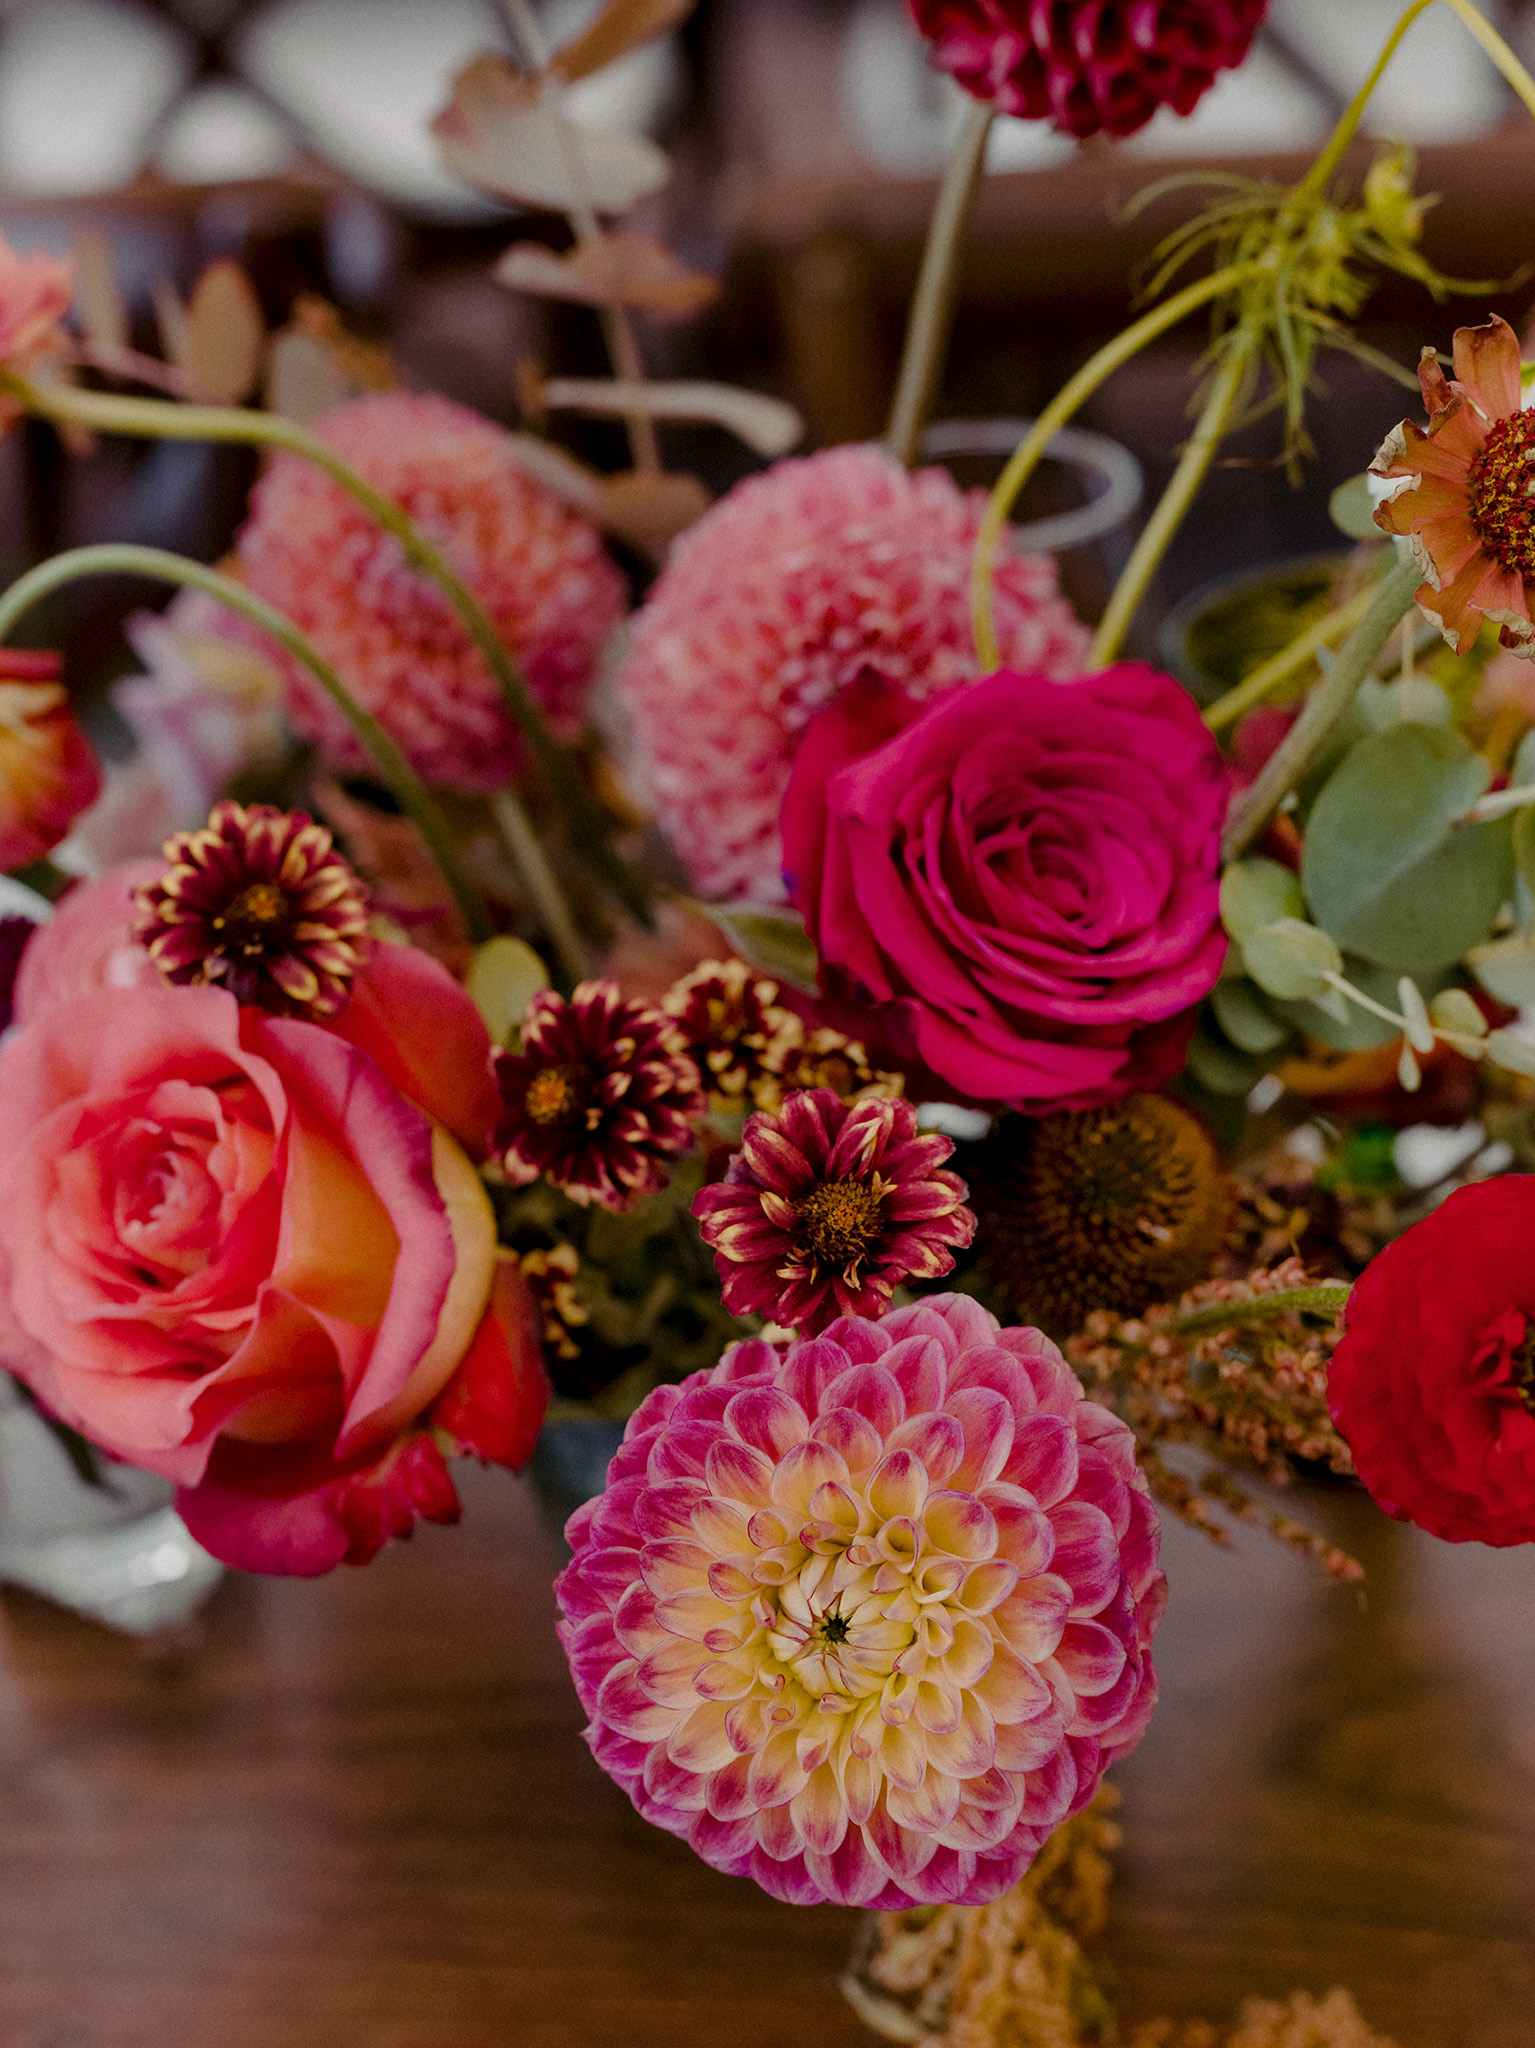 Bright and exciting wedding flowers by Bloom Bar NYC.